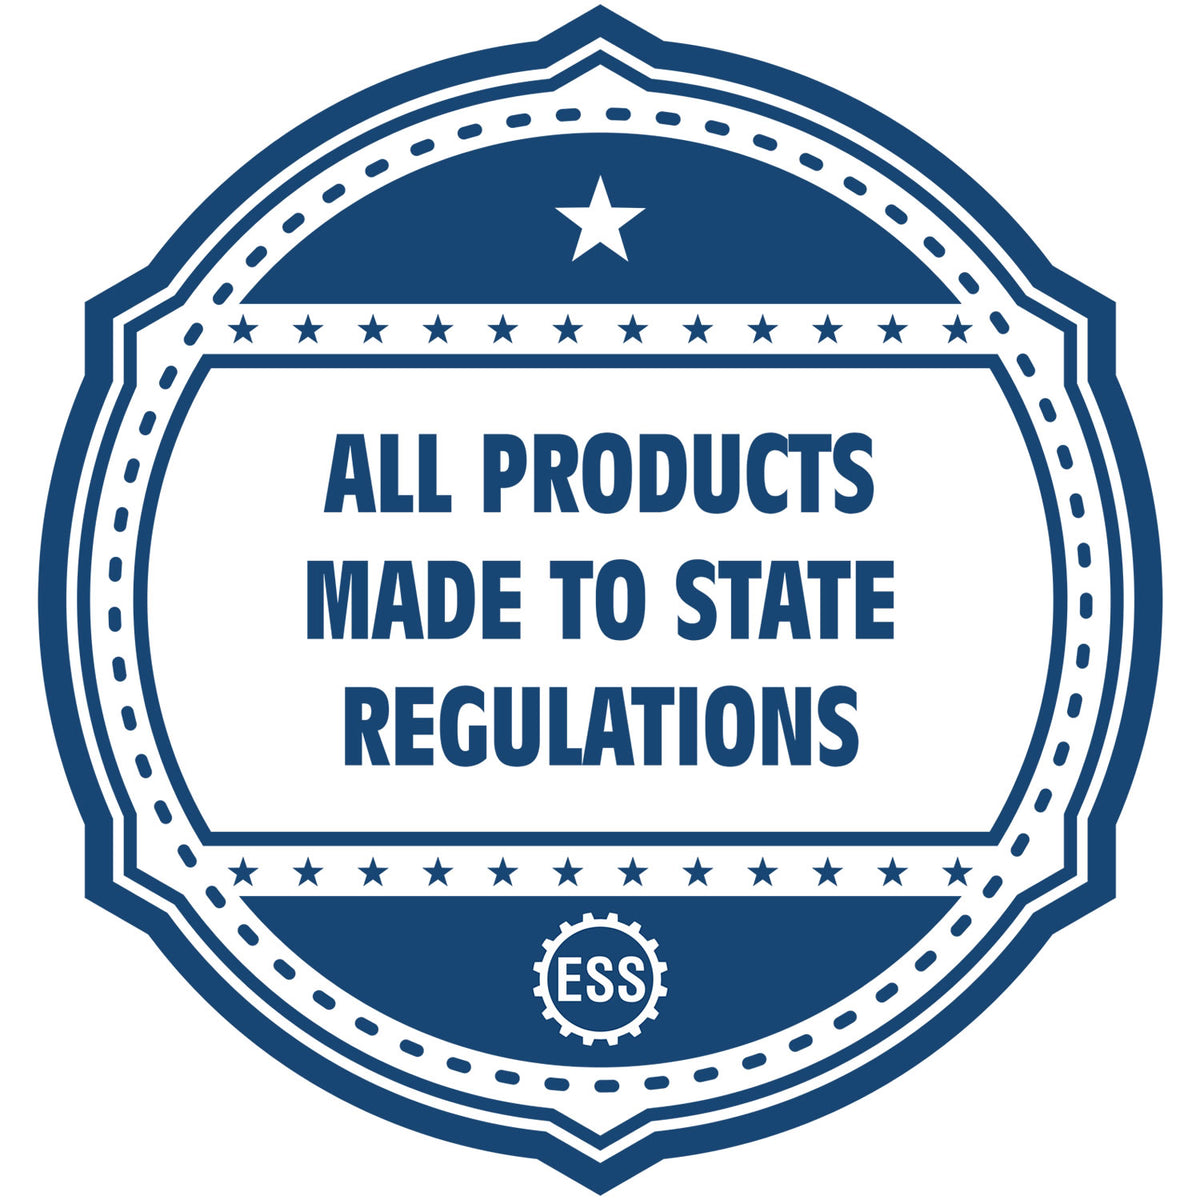 An icon or badge element for the Premium MaxLight Pre-Inked Arkansas Engineering Stamp showing that this product is made in compliance with state regulations.